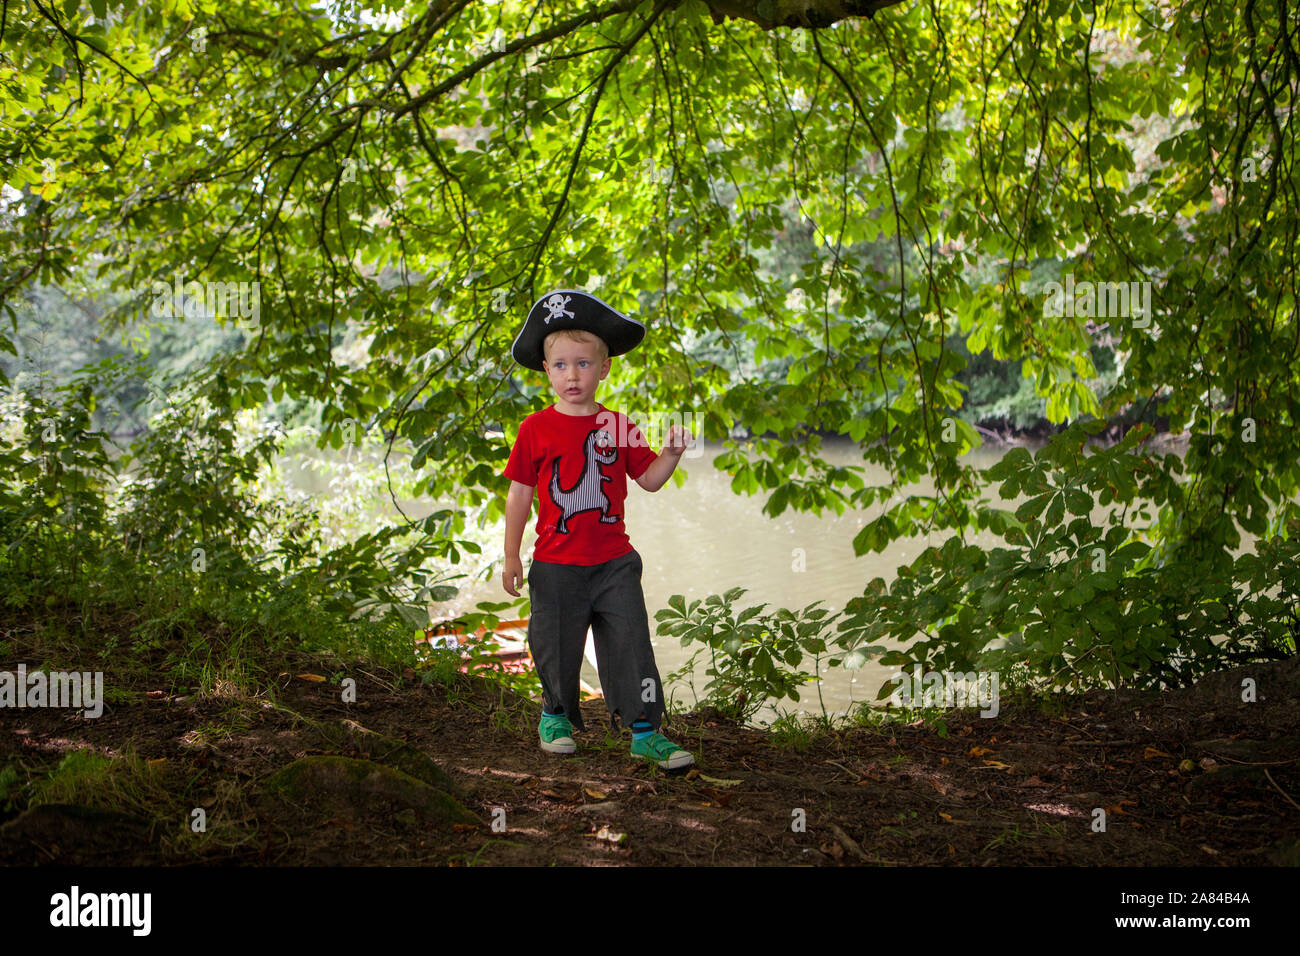 A young 4 year old boy dressed as a pirate, wearing a pirate hat and a red T-shirt with dinosaur on it. Stock Photo